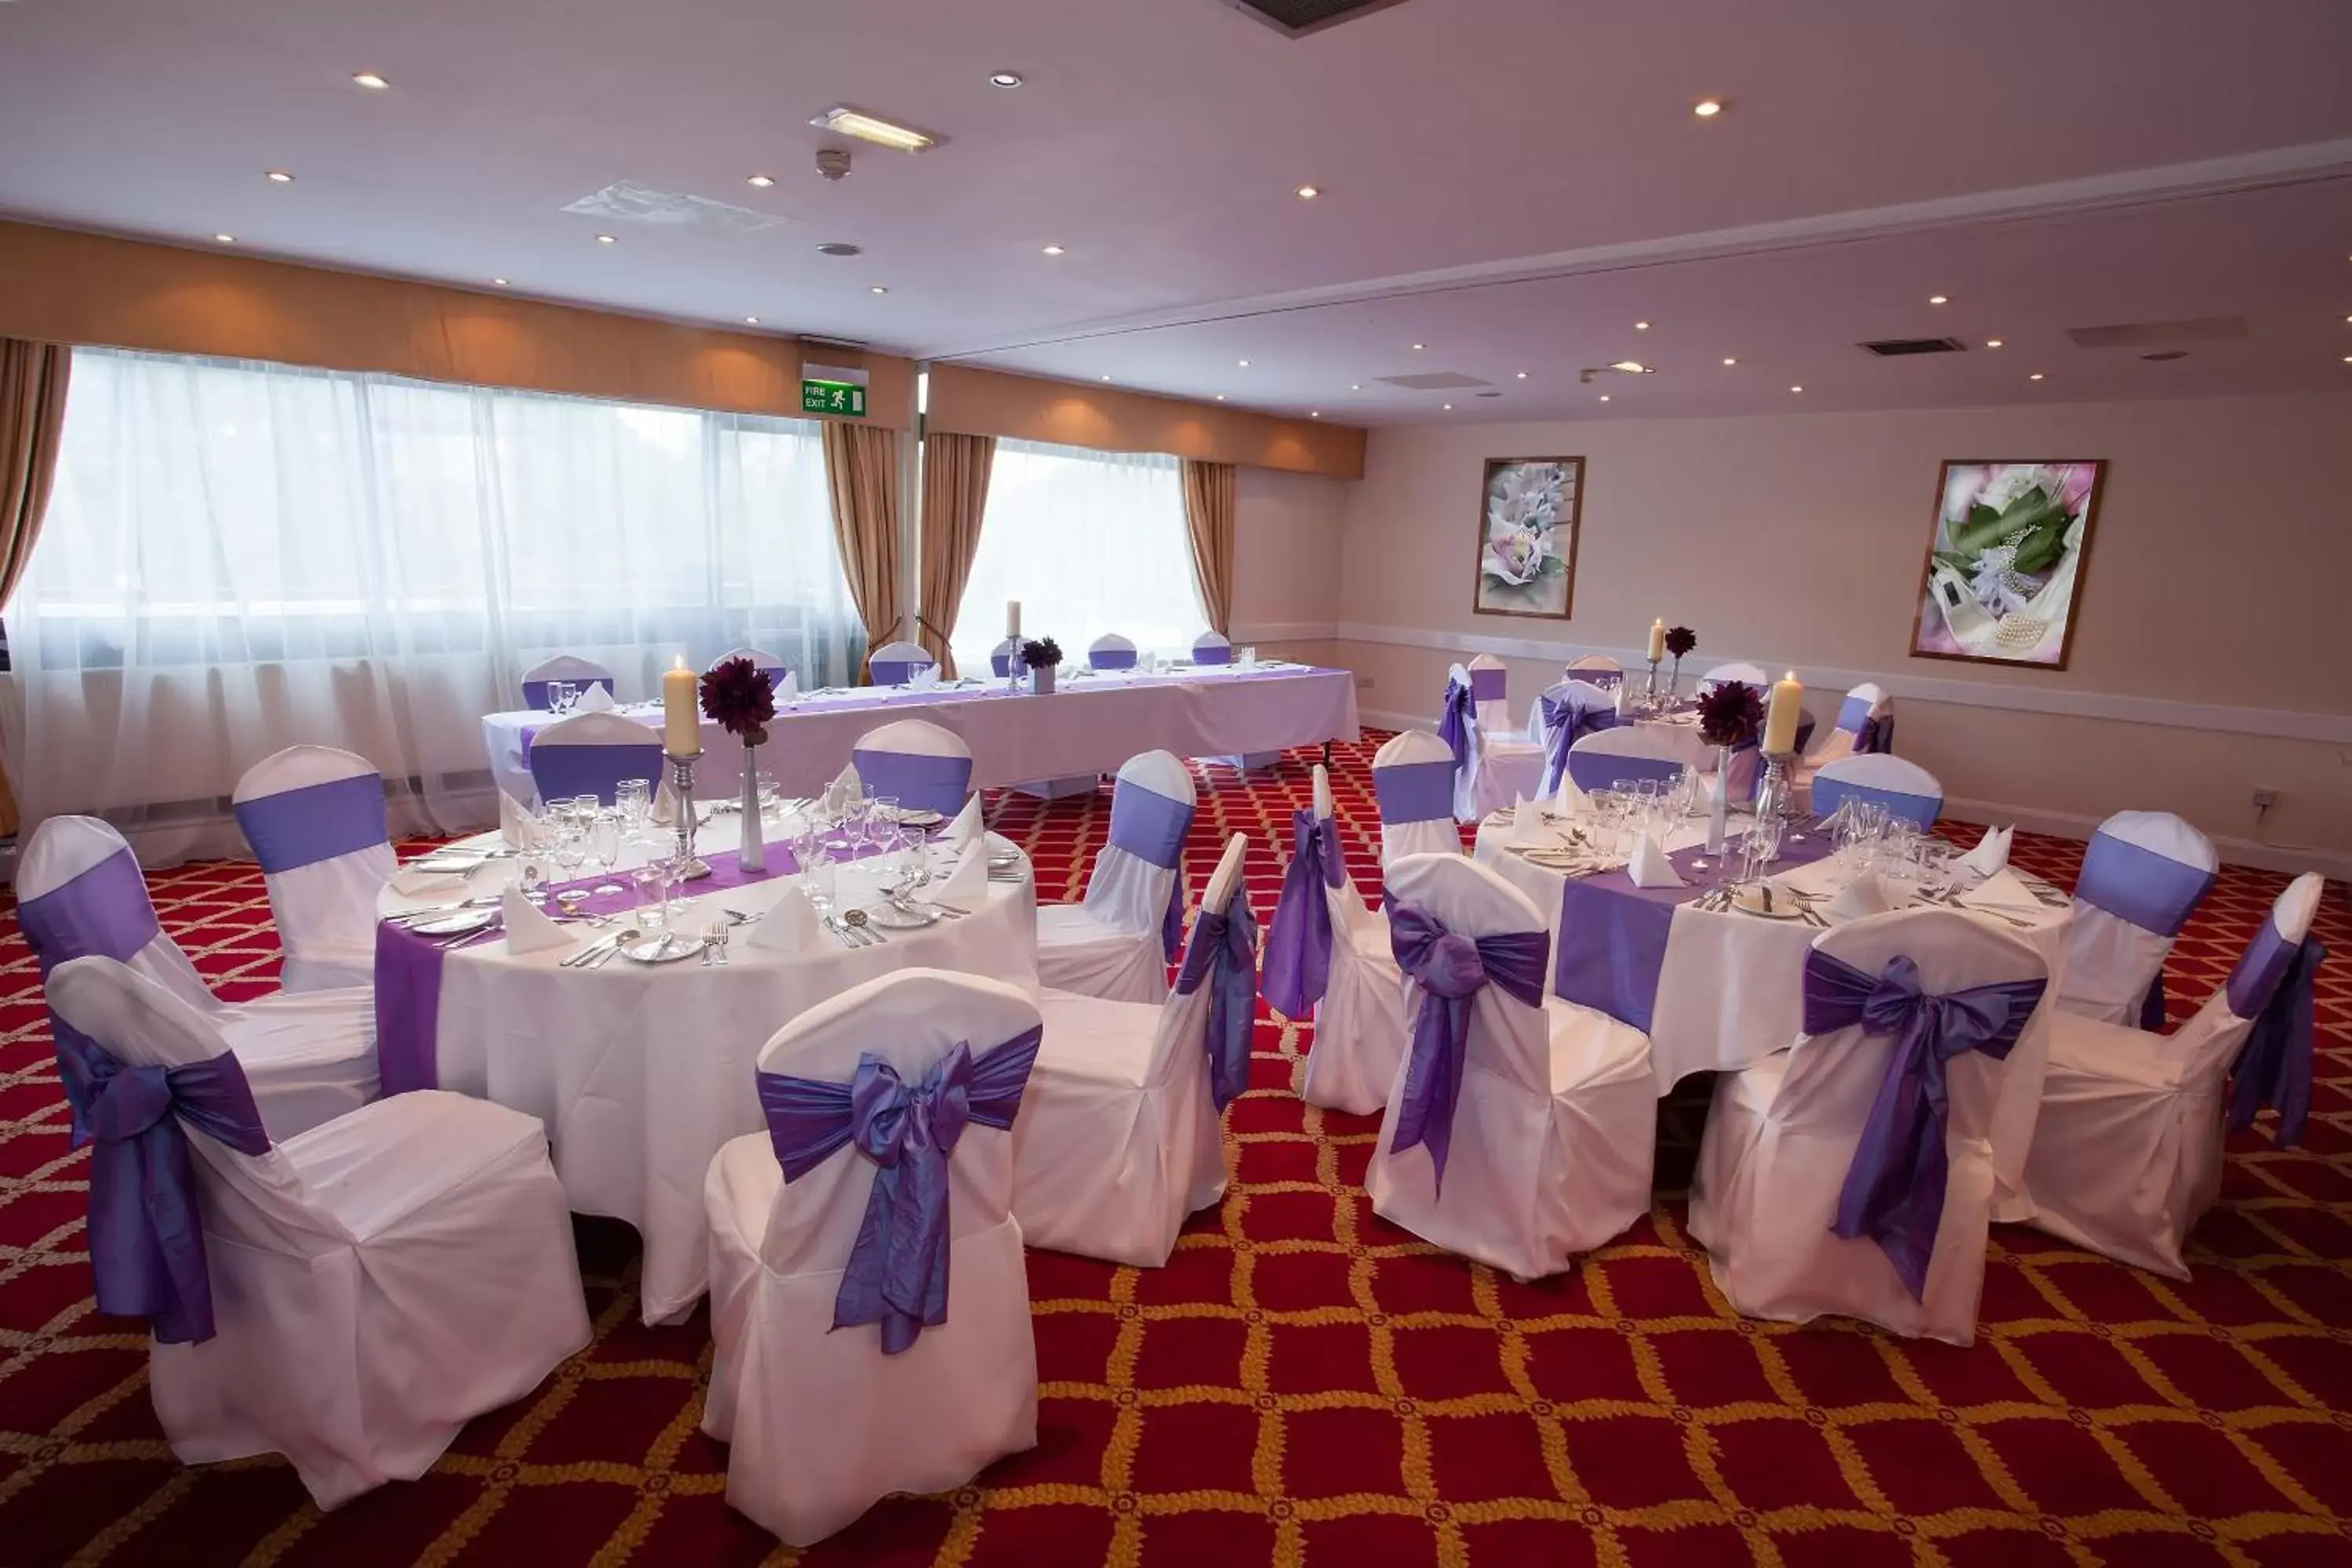 Banquet/Function facilities, Banquet Facilities in Airport Hotel Manchester